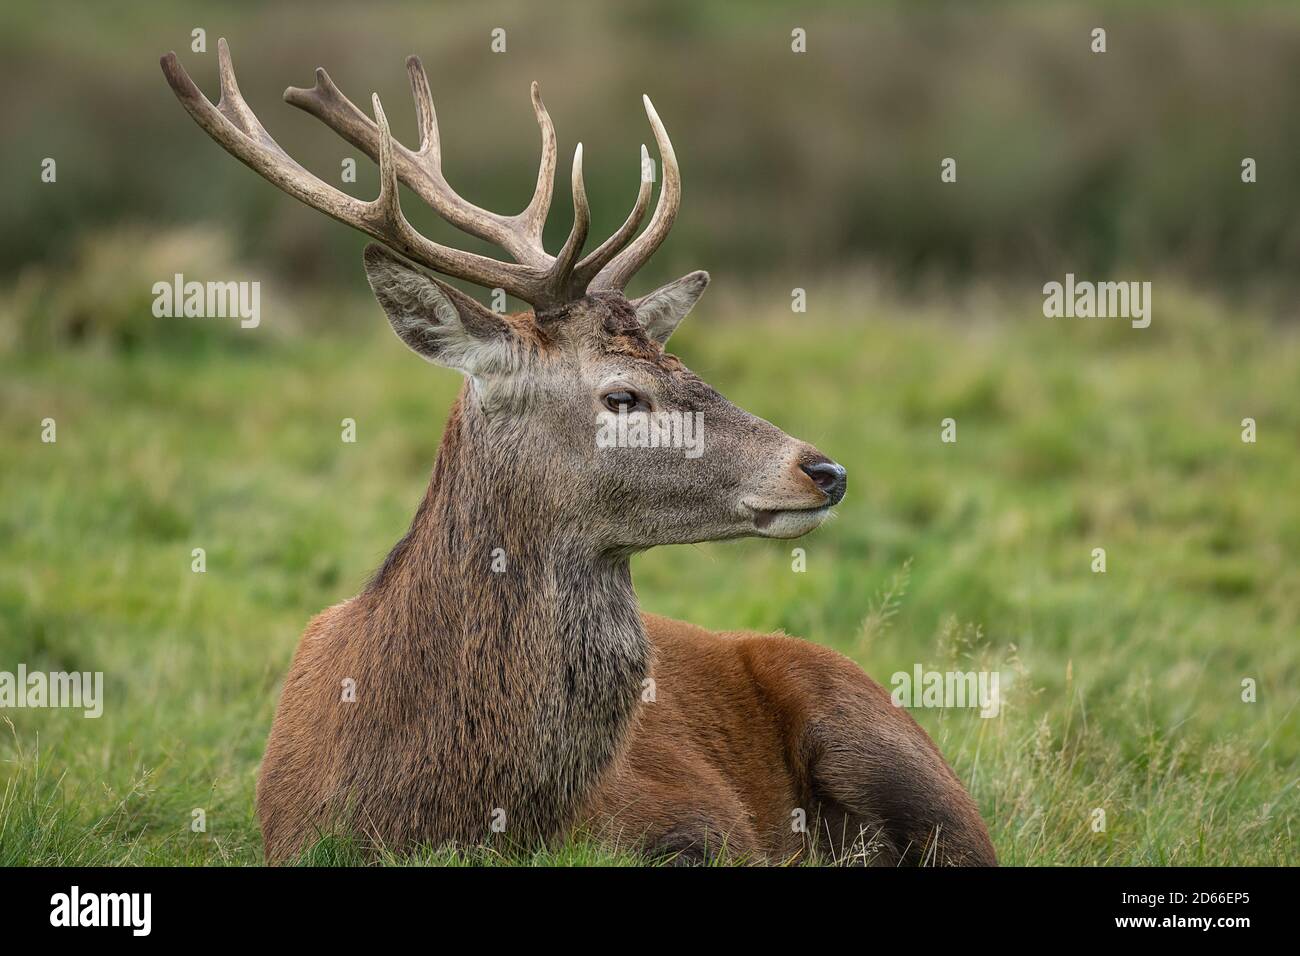 A close up profile portrait of a young red deer stag relaxing on the grass and looking to the right into copy space Stock Photo